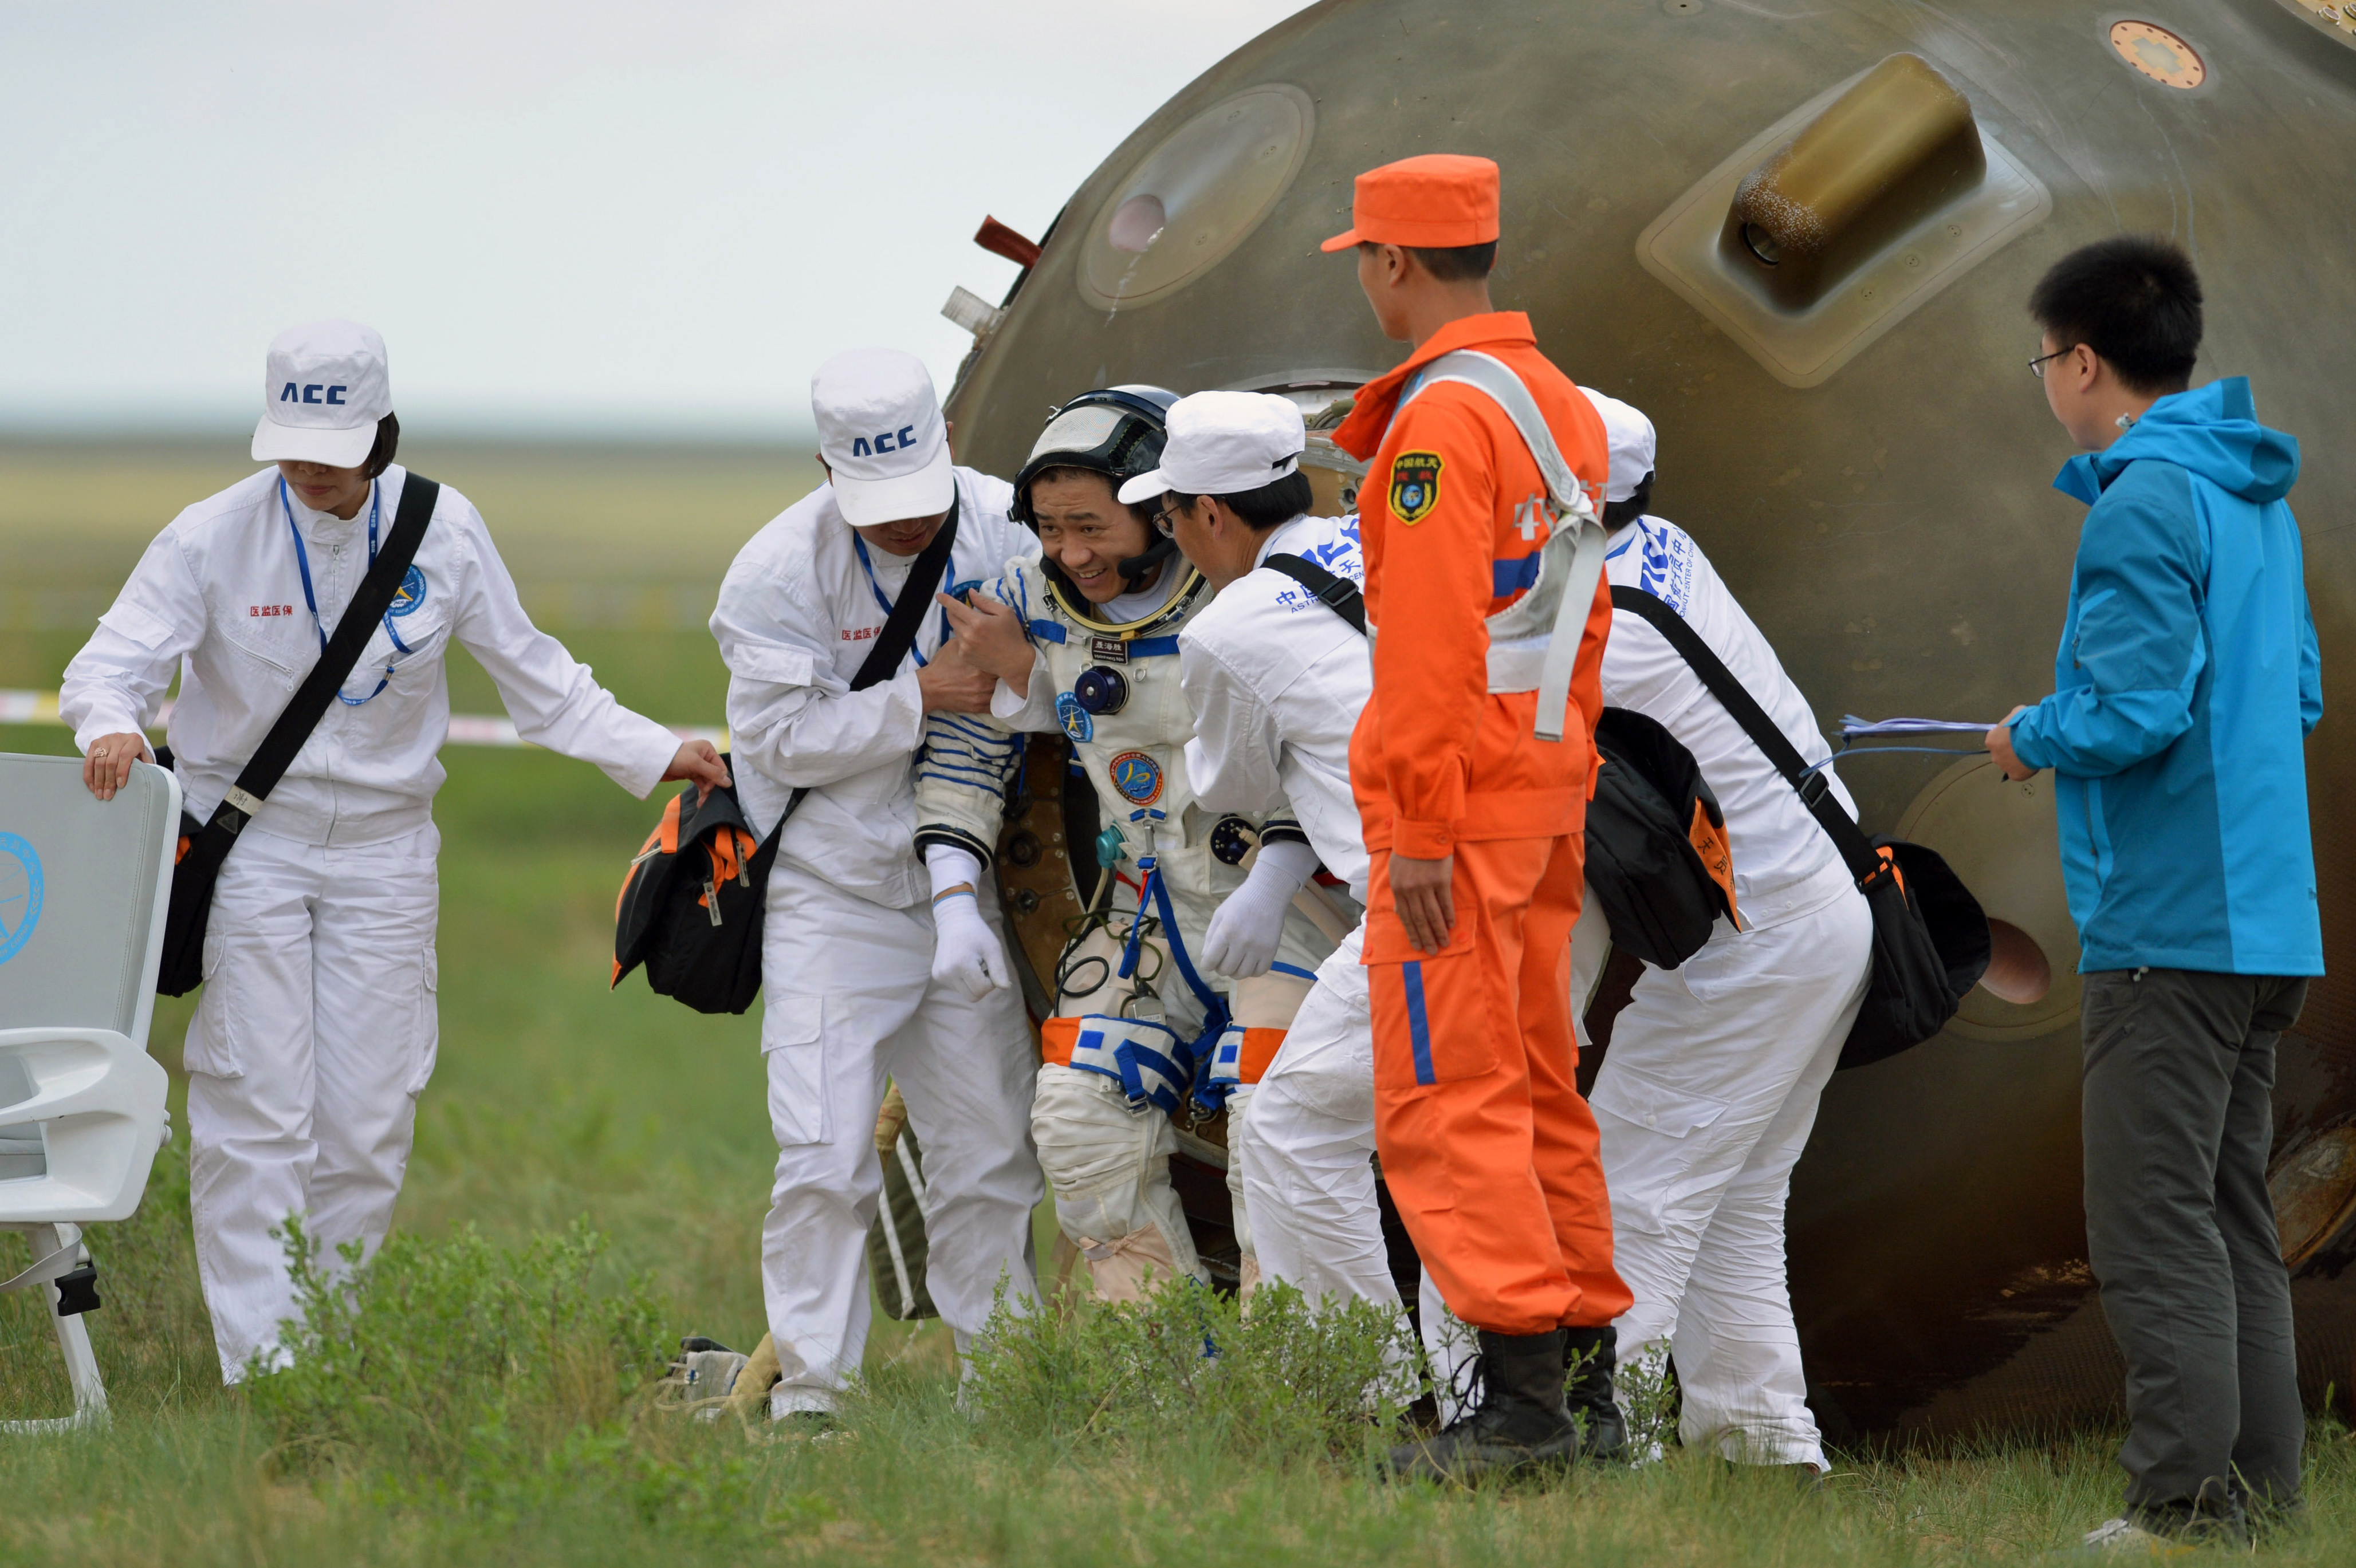 Welcome home: Nie Haisheng is helped out of his Shenzhou 10 spacecraft after a 15-day mission in 2013. (AFP/Getty Images)